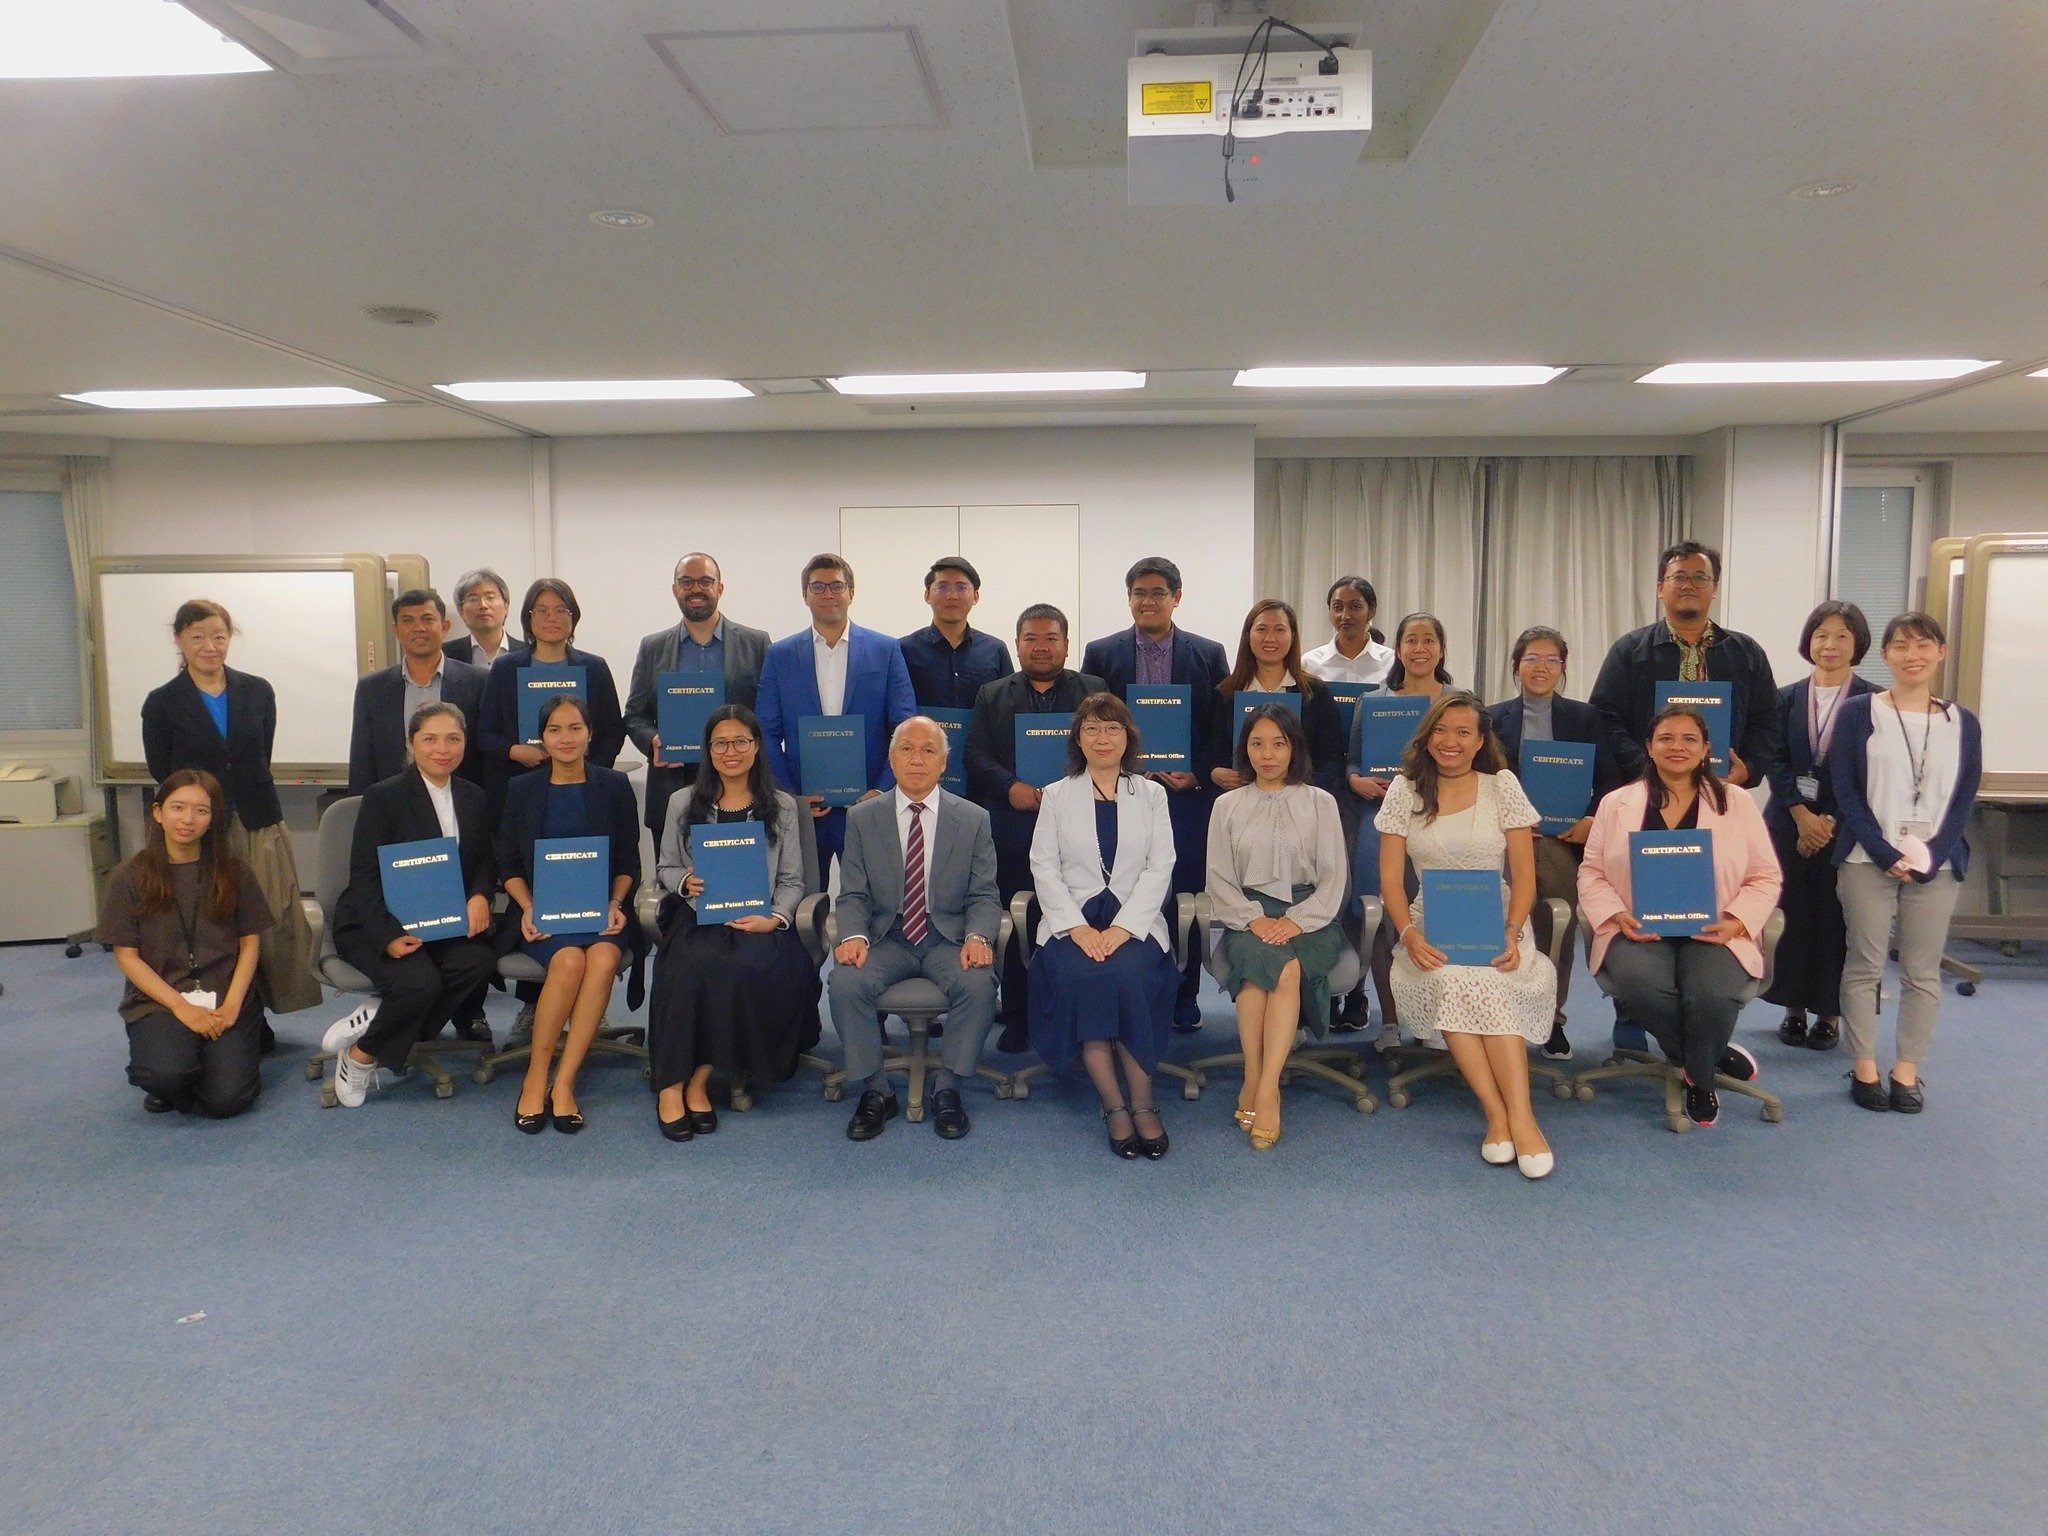 Photo: Participants of JPO/IPR training course for IP practitioners; photo grabbed from the official Facebook page of JPO